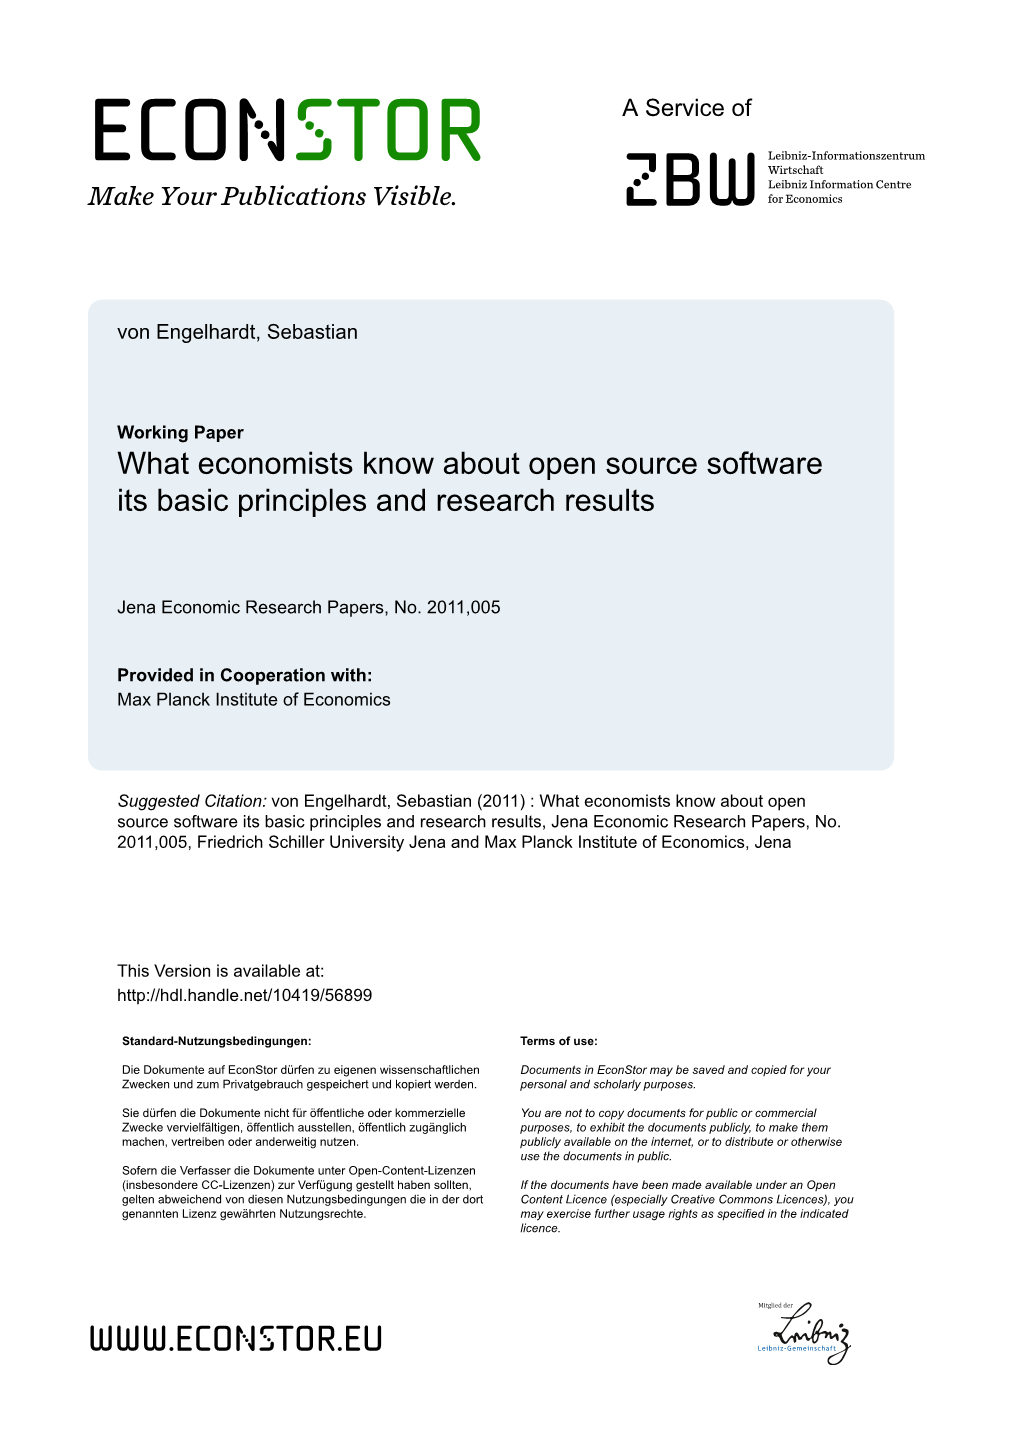 What Economists Know About Open Source Software Its Basic Principles and Research Results